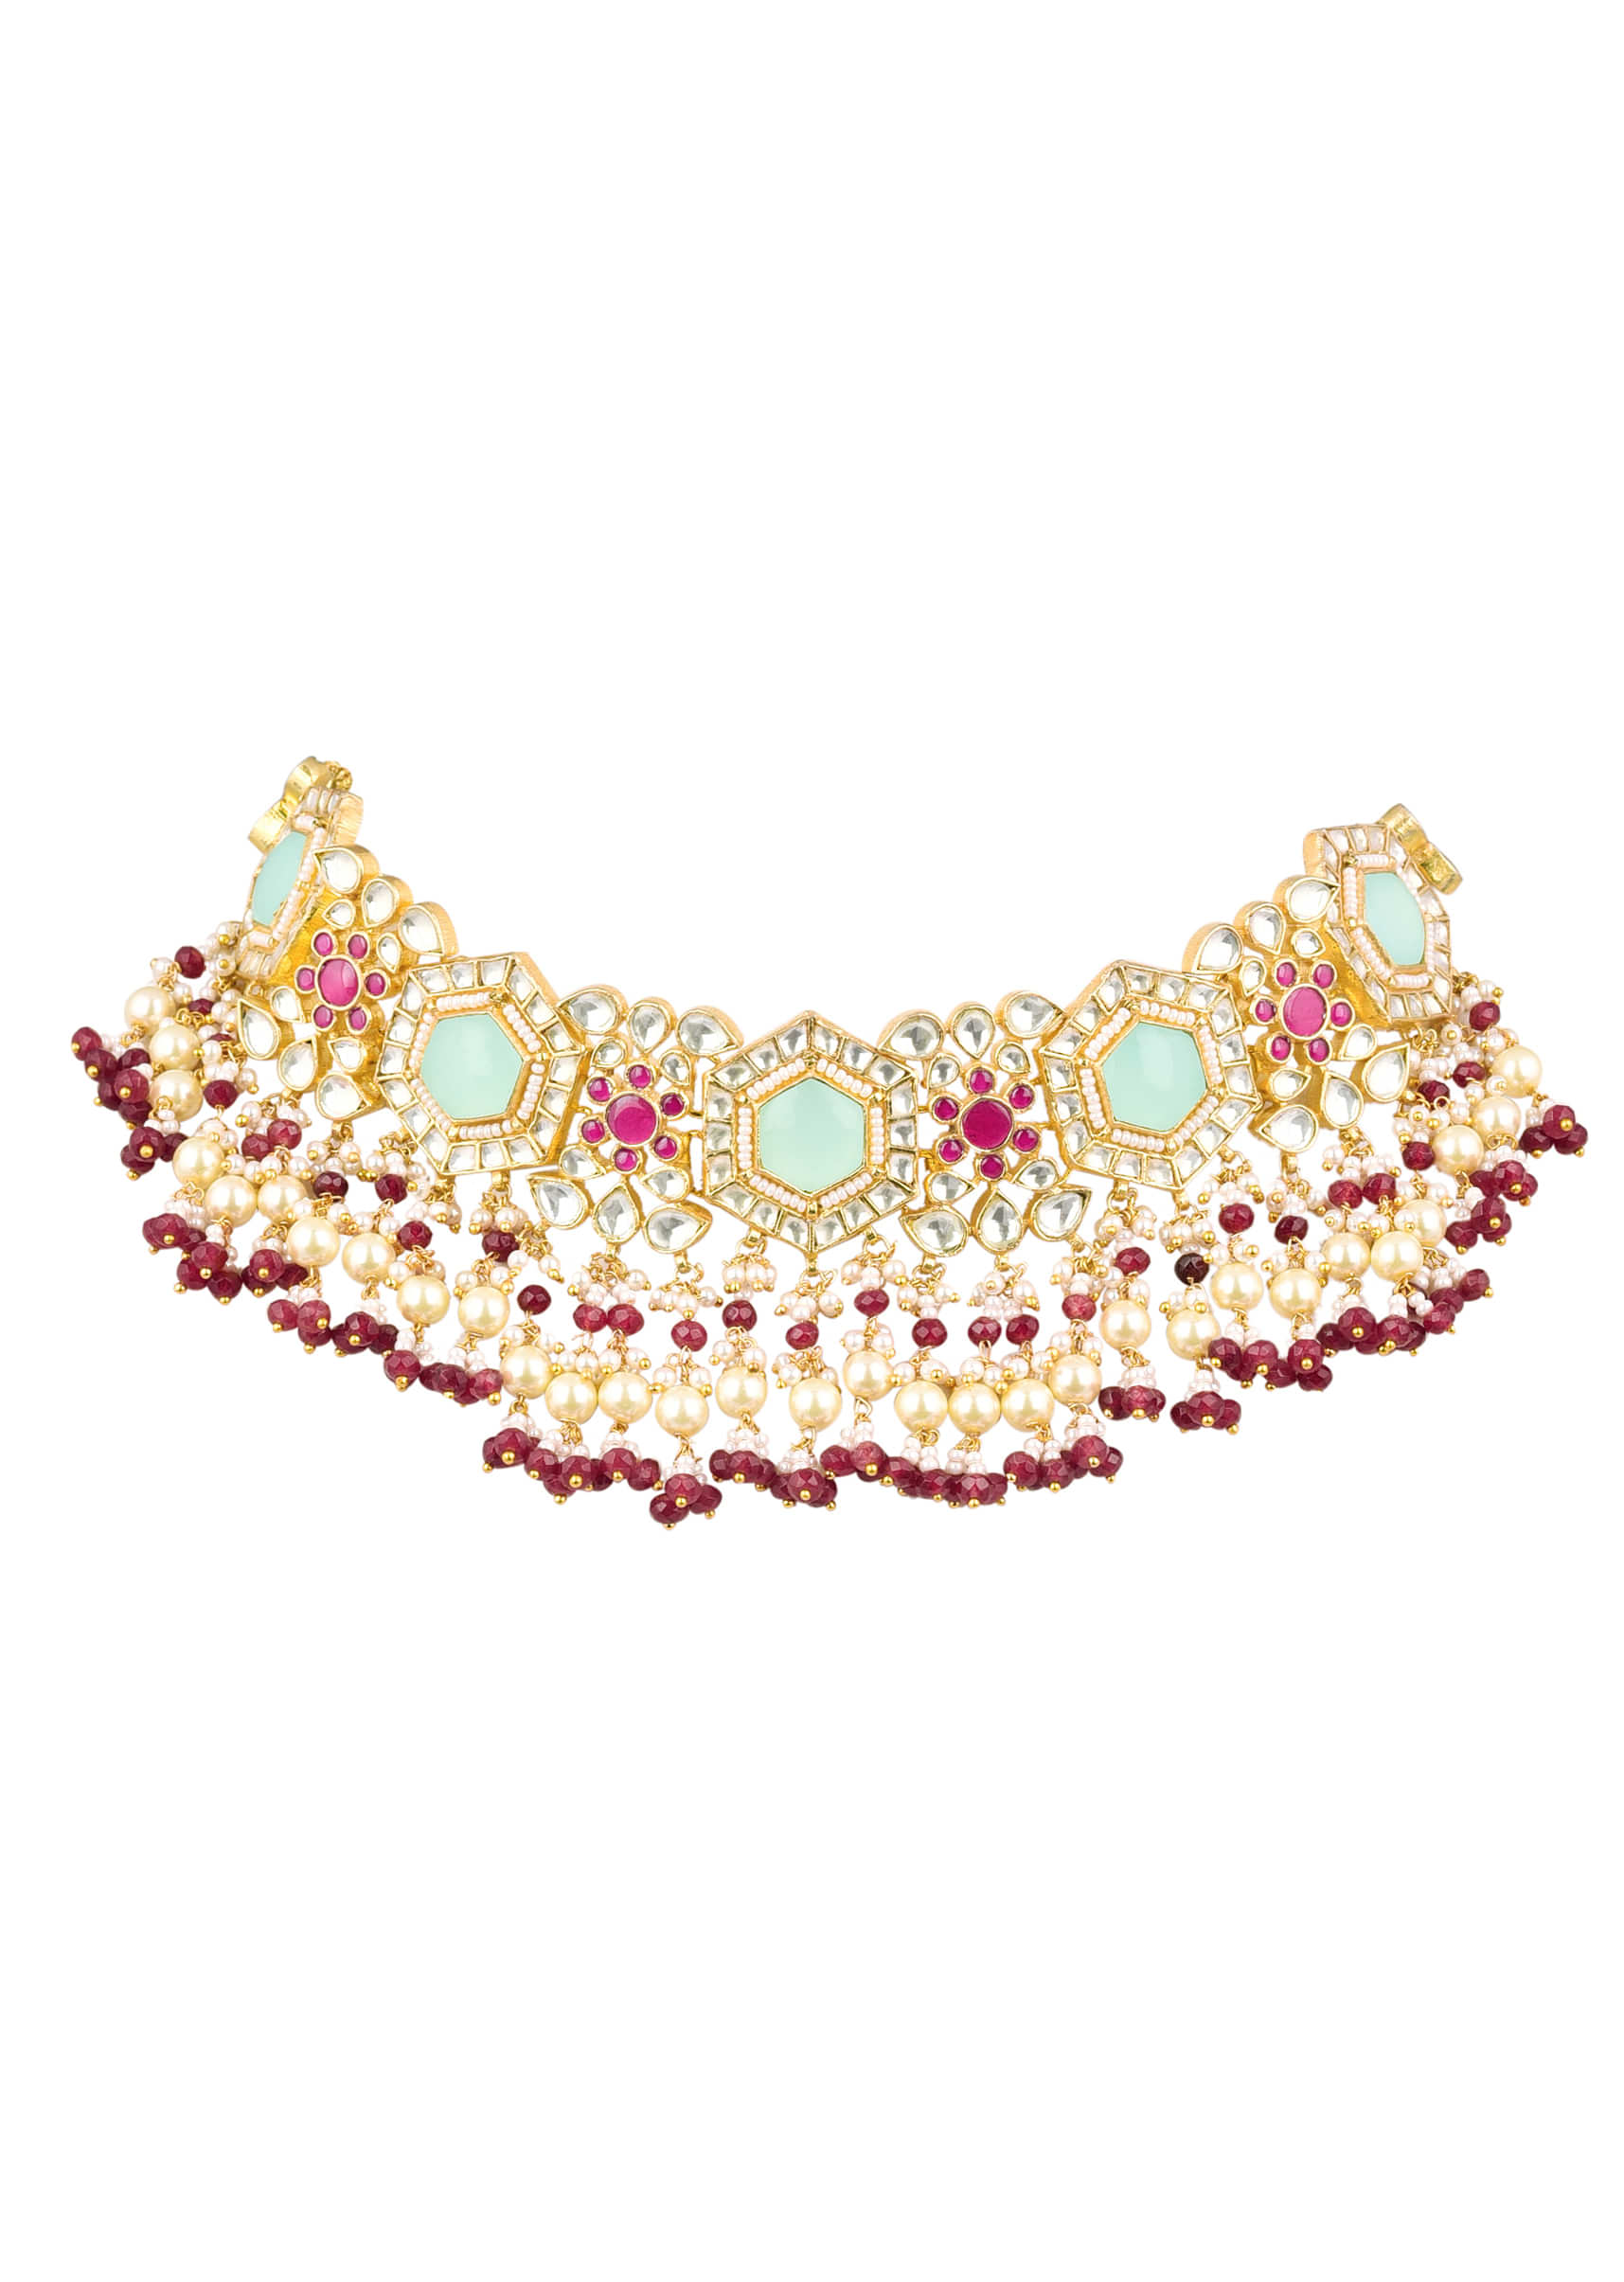 Gold Finish Kundan Choker Set With Beads, Pearls, And Synthetic Ruby Stones